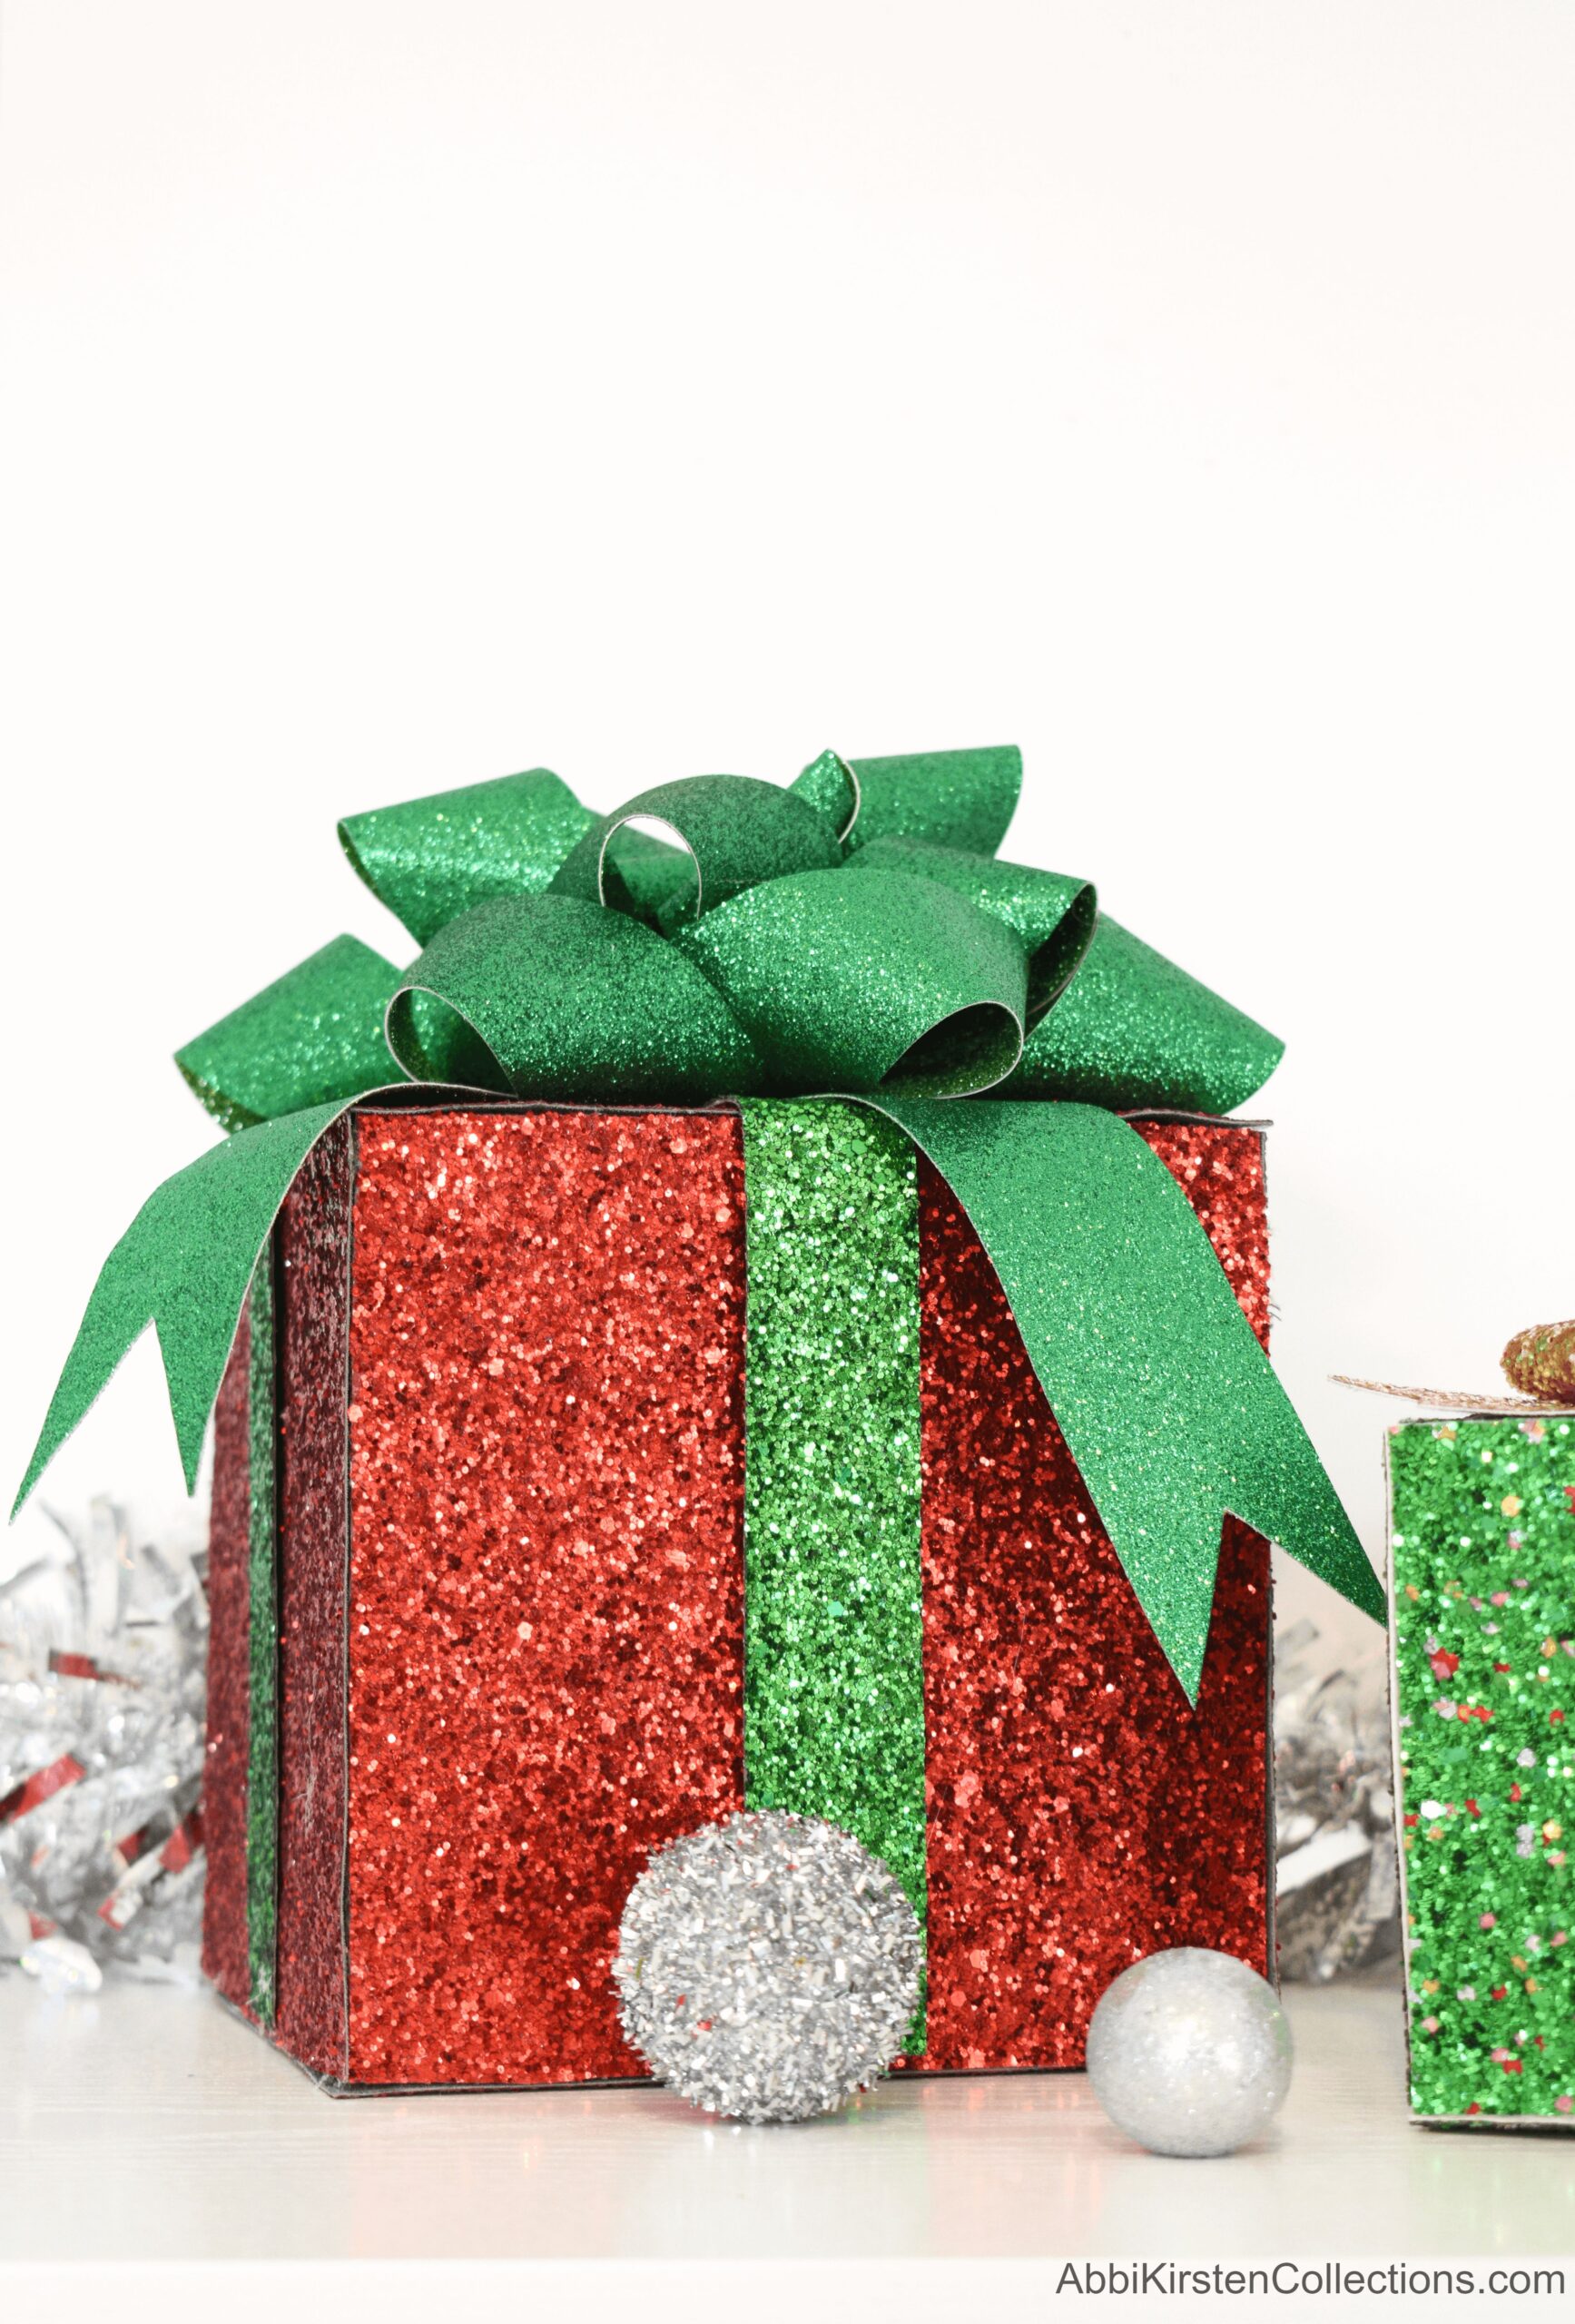 A glittery red decorative gift box with a green bow sits on the floor surrounded by silver tinsel.